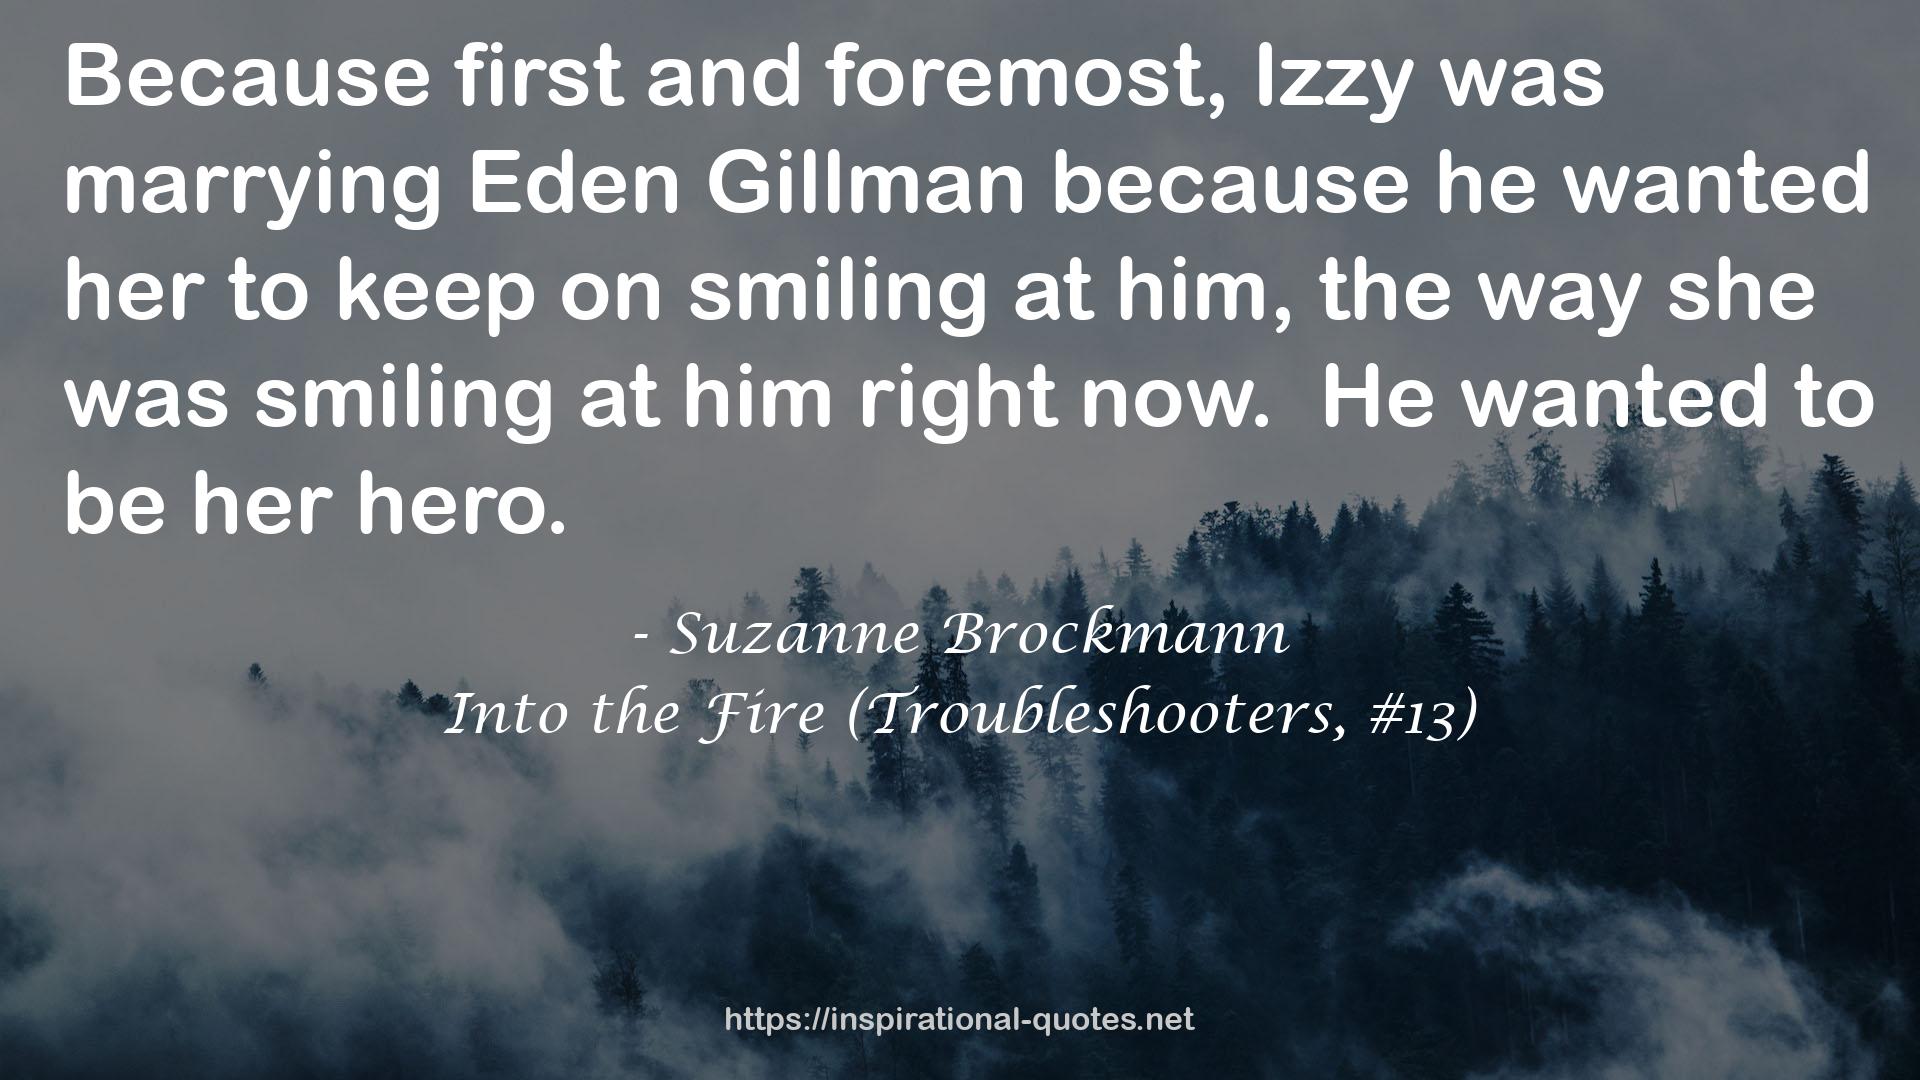 Into the Fire (Troubleshooters, #13) QUOTES